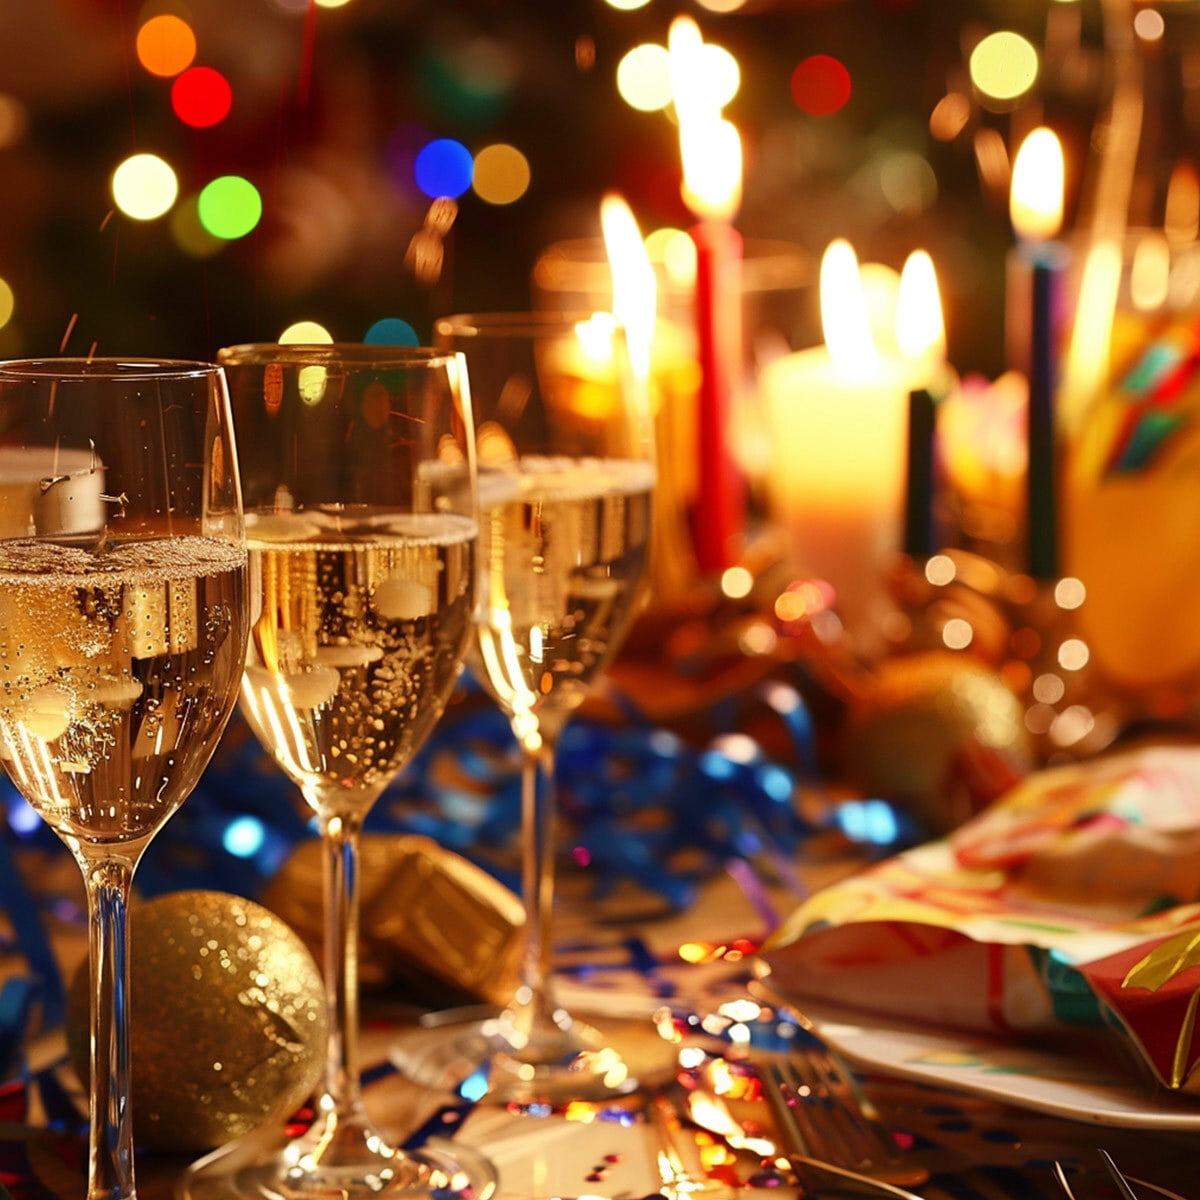 Celebrate the turn of the year with a cheerful New Year's Eve holiday at the Seehotel Ecktannen.